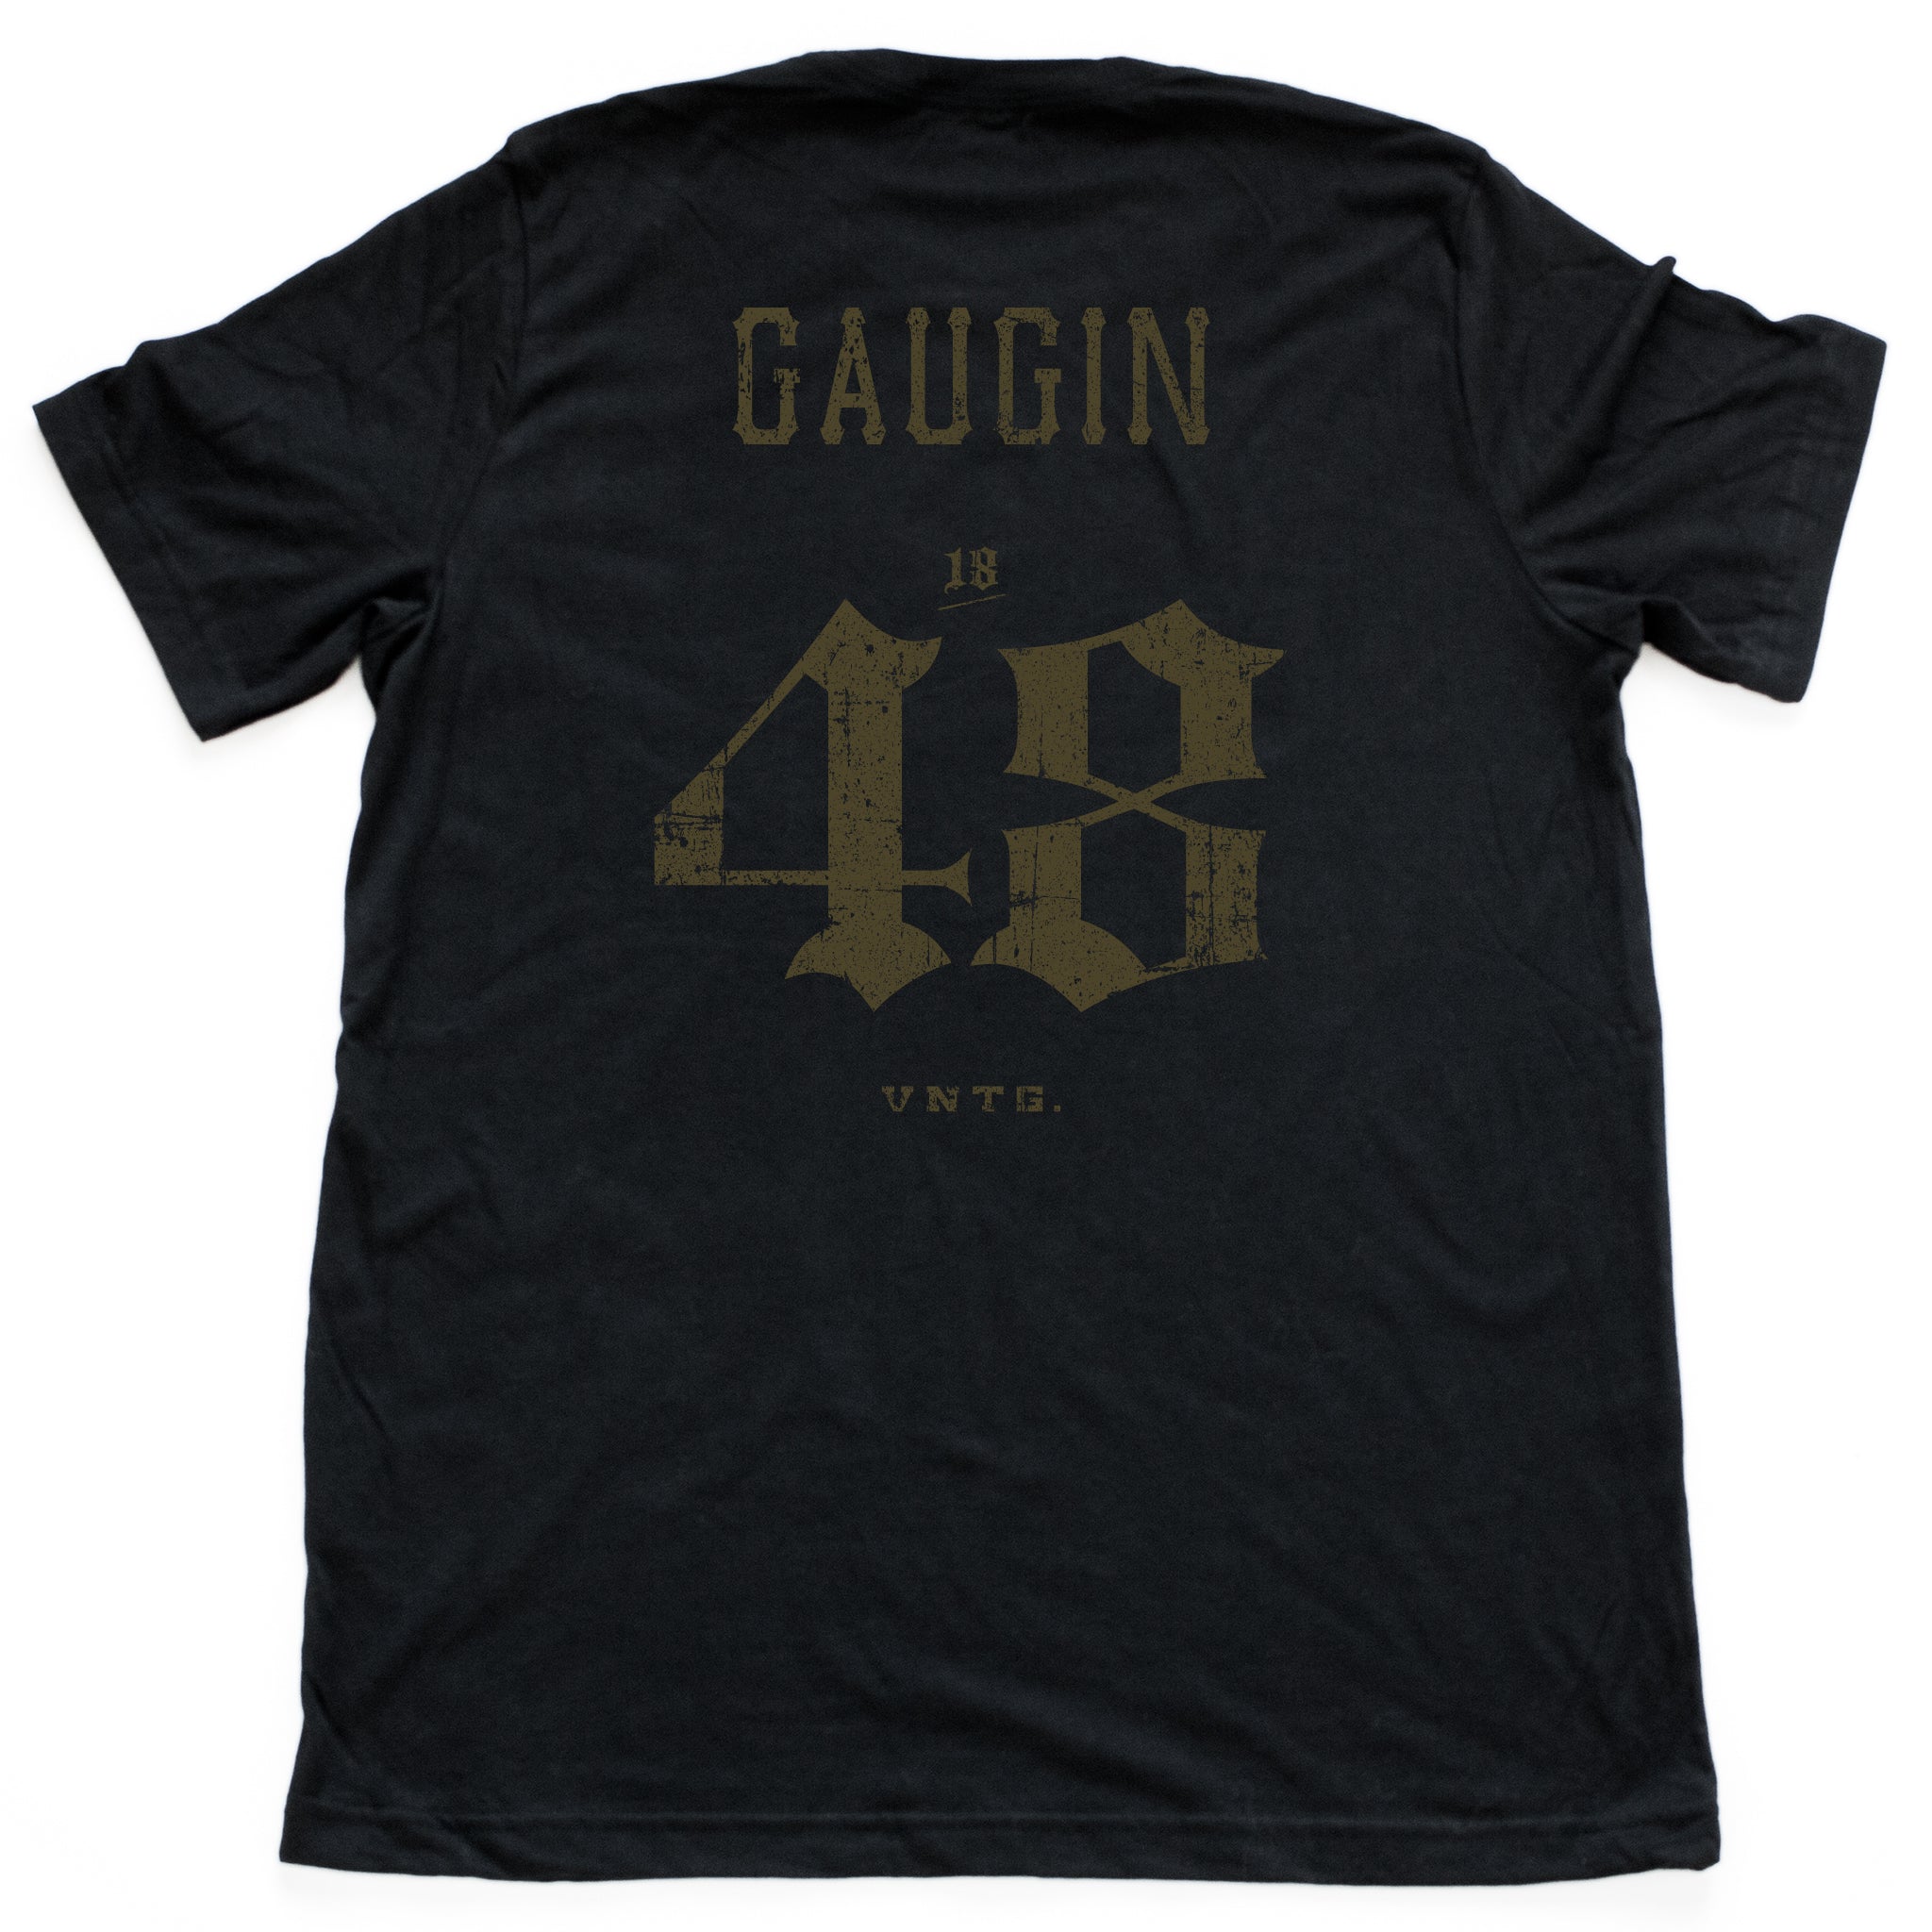 A vintage-inspired retro t-shirt in a mock athletic style, with a sarcastic nod to liberal arts college. This shirt, in Classic black, features the name of the fauve impressionist painter GAUGUIN and his birth year ‘48 on the back. By fashion brand VNTG., from wolfsaint.net